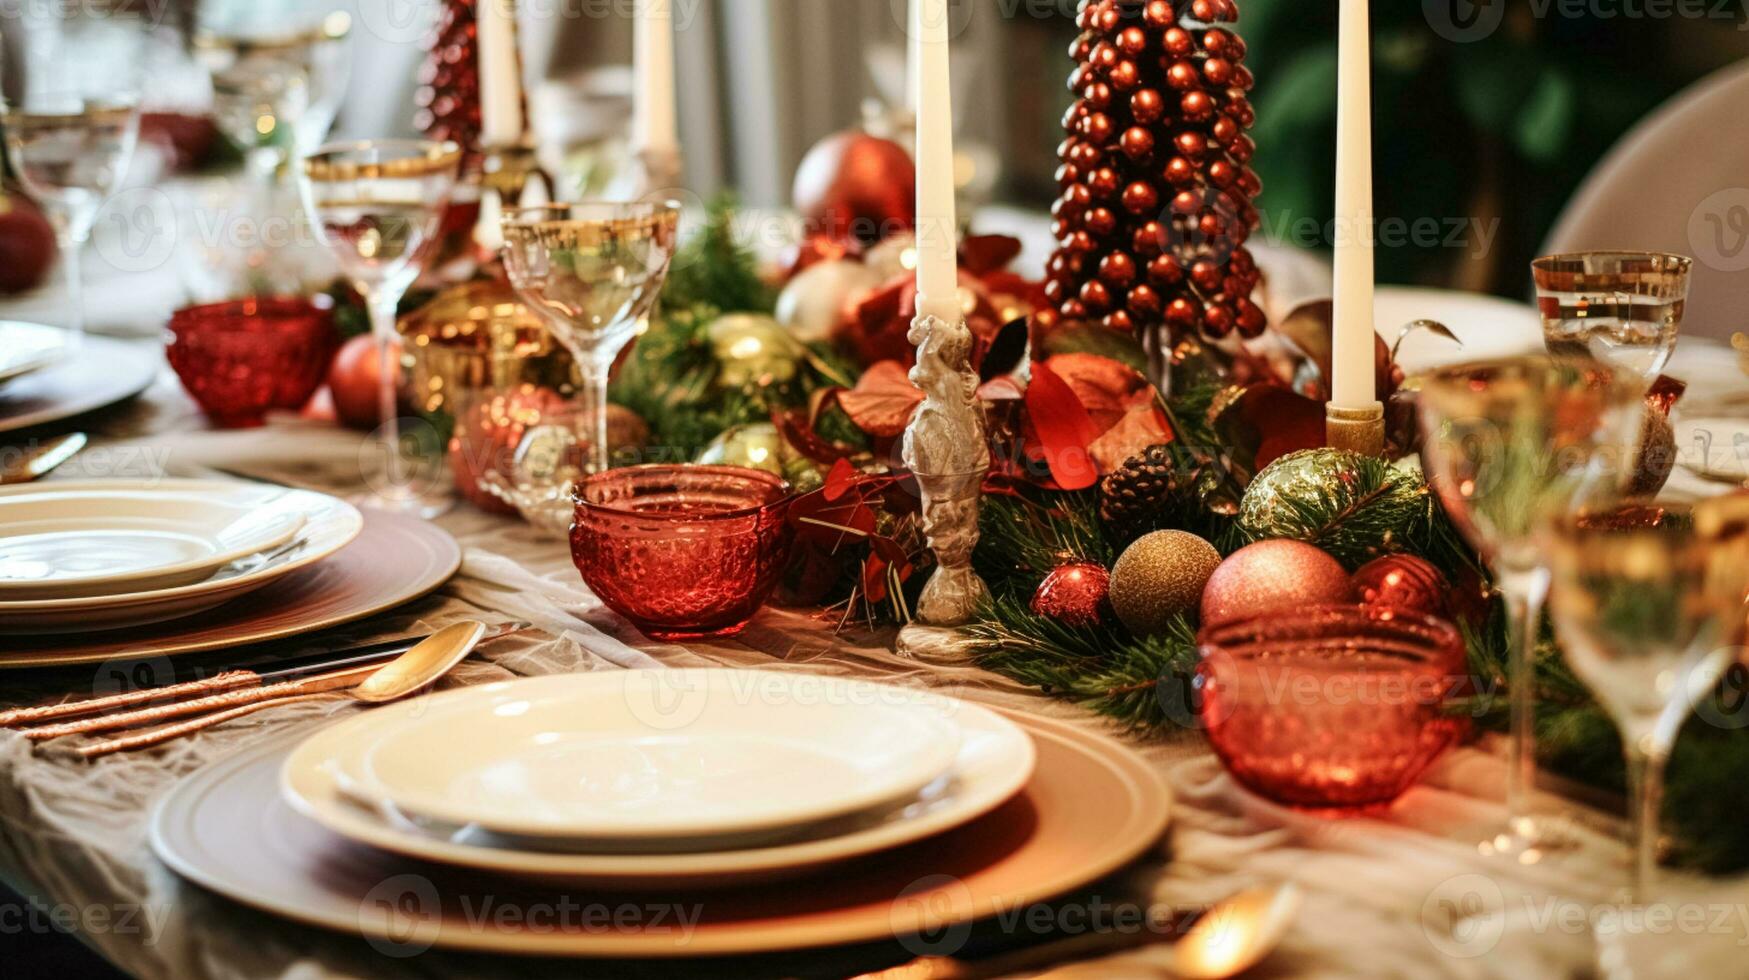 Table decor, holiday tablescape and formal dinner table setting for Christmas, holidays and event celebration, English country decoration and home styling photo